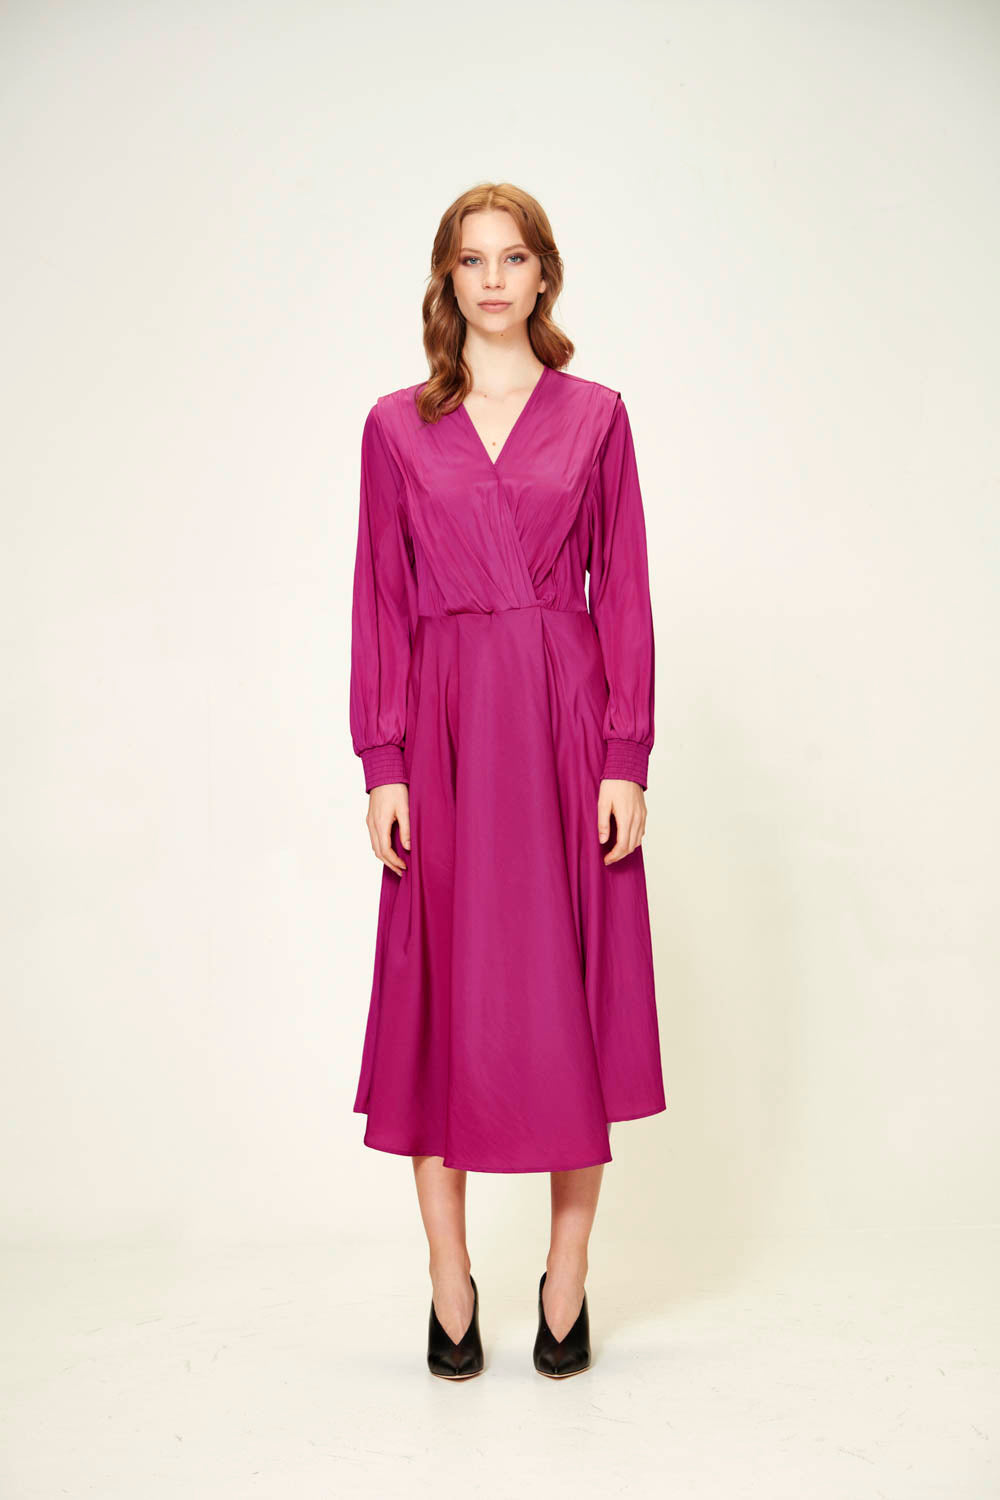 Glide by Verge - Rania Dress - Orchid - Dress VERGE